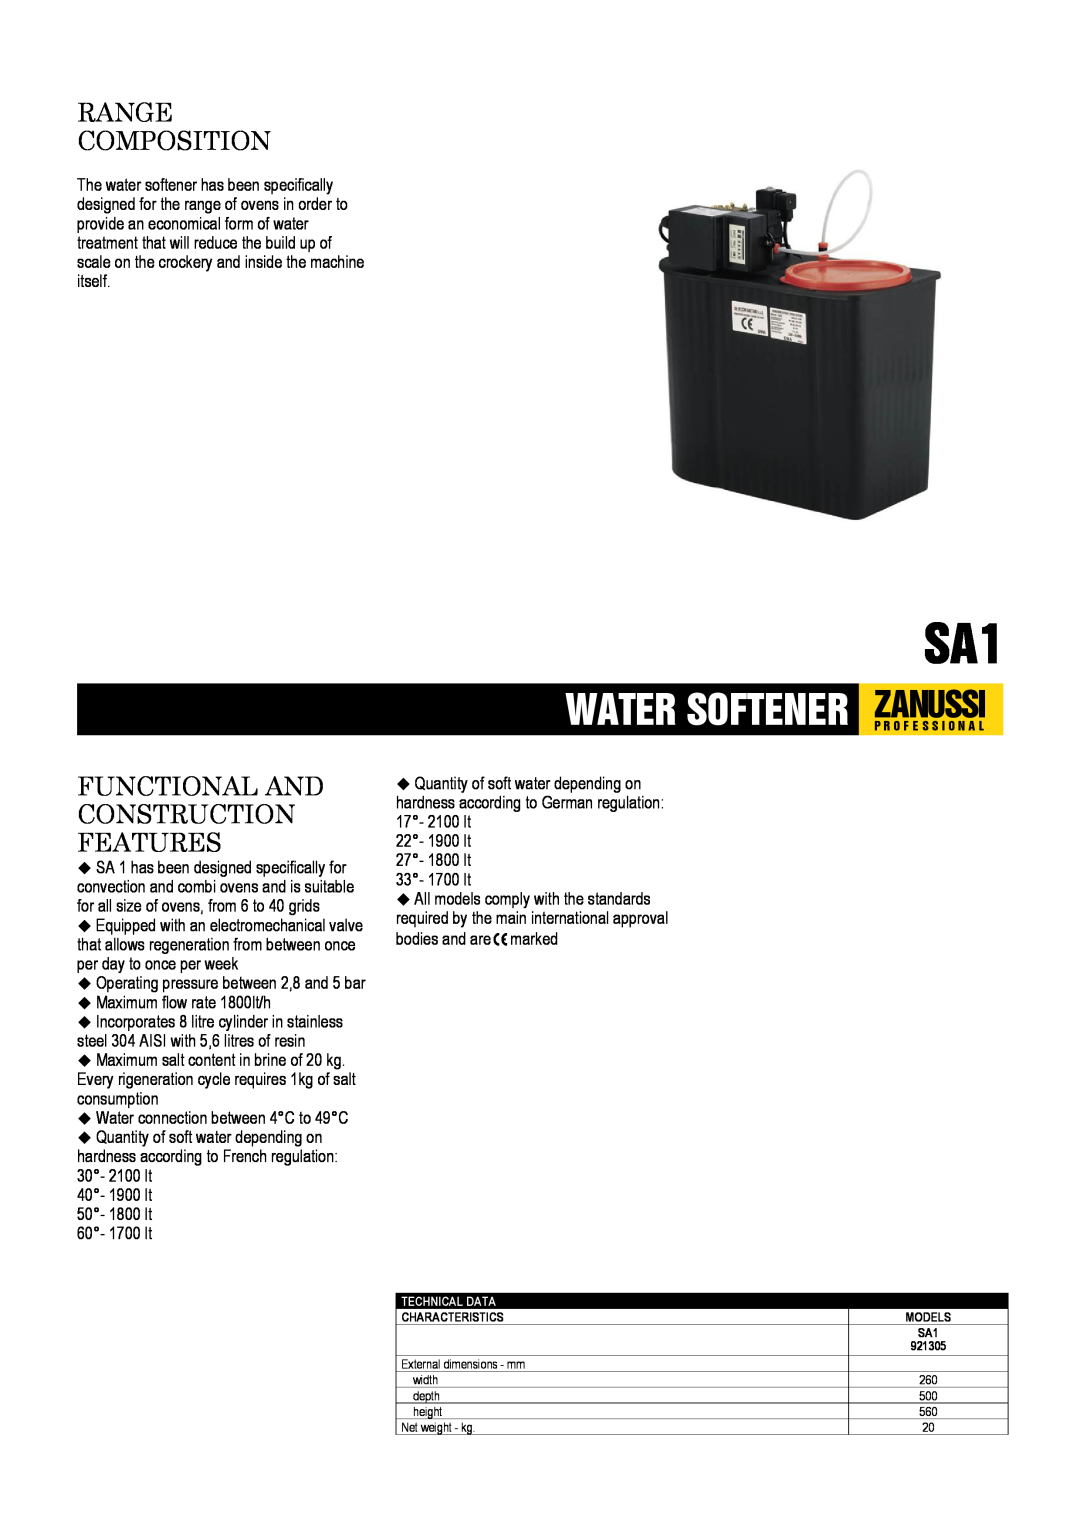 Zanussi 921305, SA1 dimensions Zanussi, Water Softener, Range Composition, Functional And Construction Features 